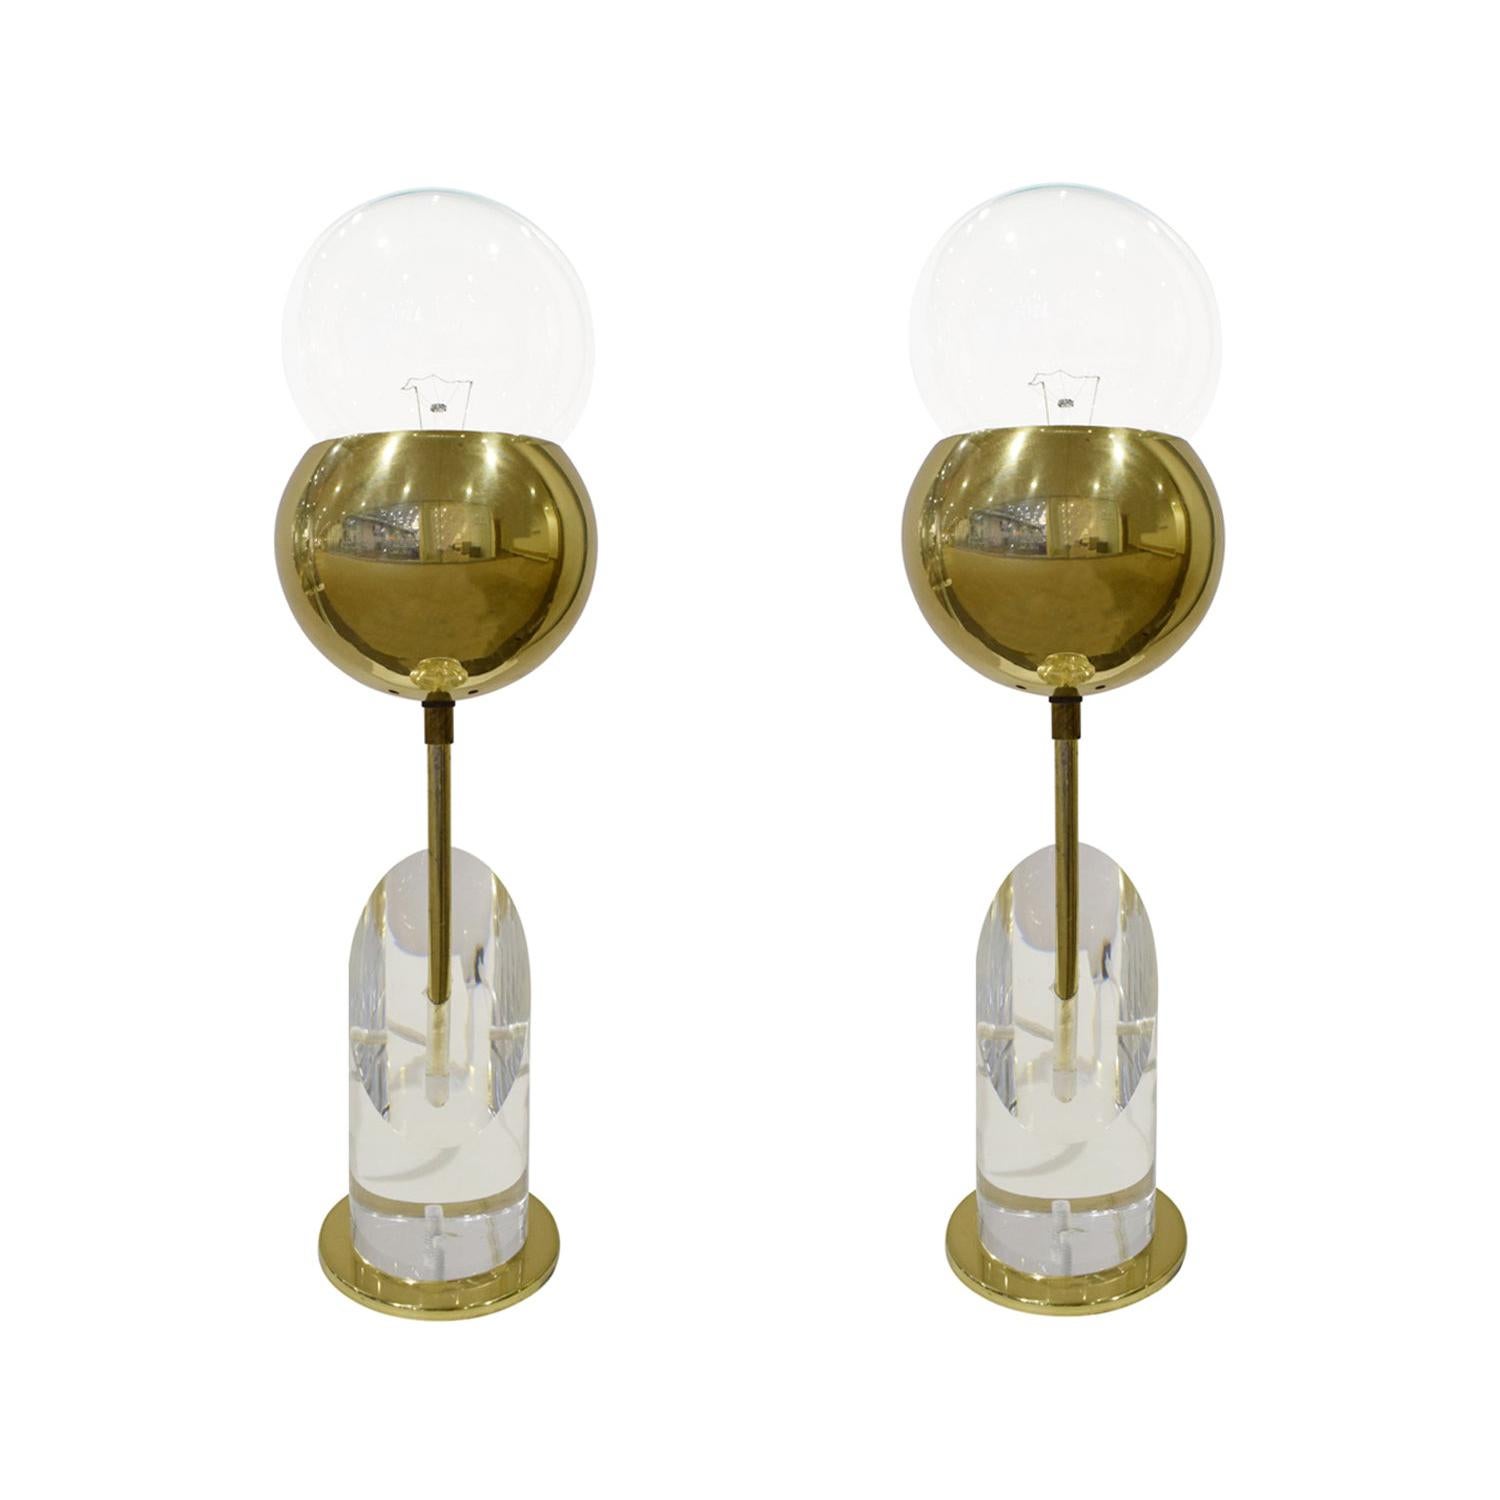 Pair of Sculptural Brass and Lucite Table Lamps, 1970s